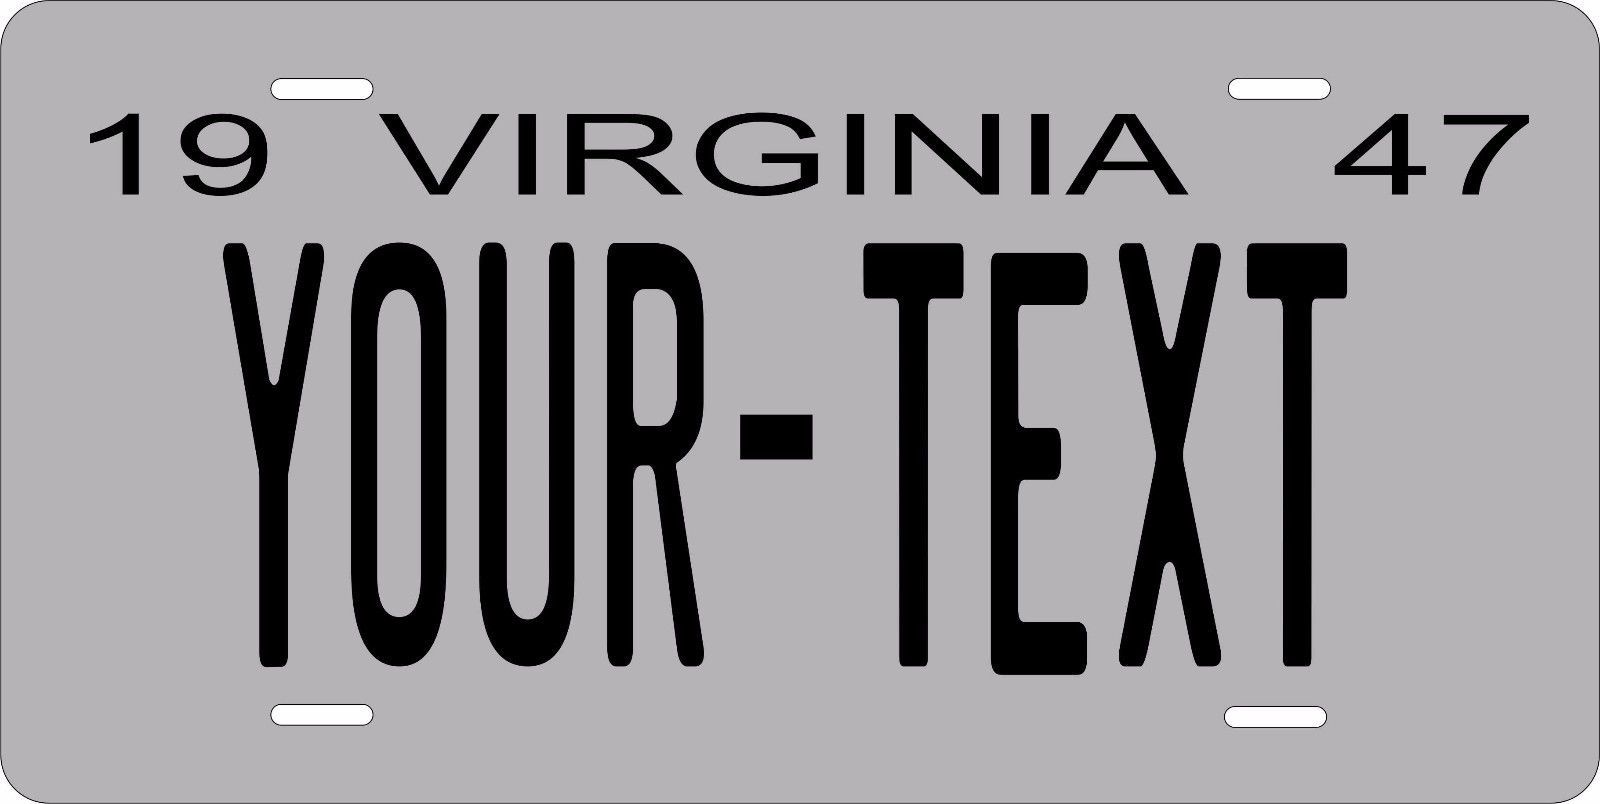 Virginia 1947 License Plate Personalized Custom Auto Bike Motorcycle Moped Tag - $10.99 - $18.22